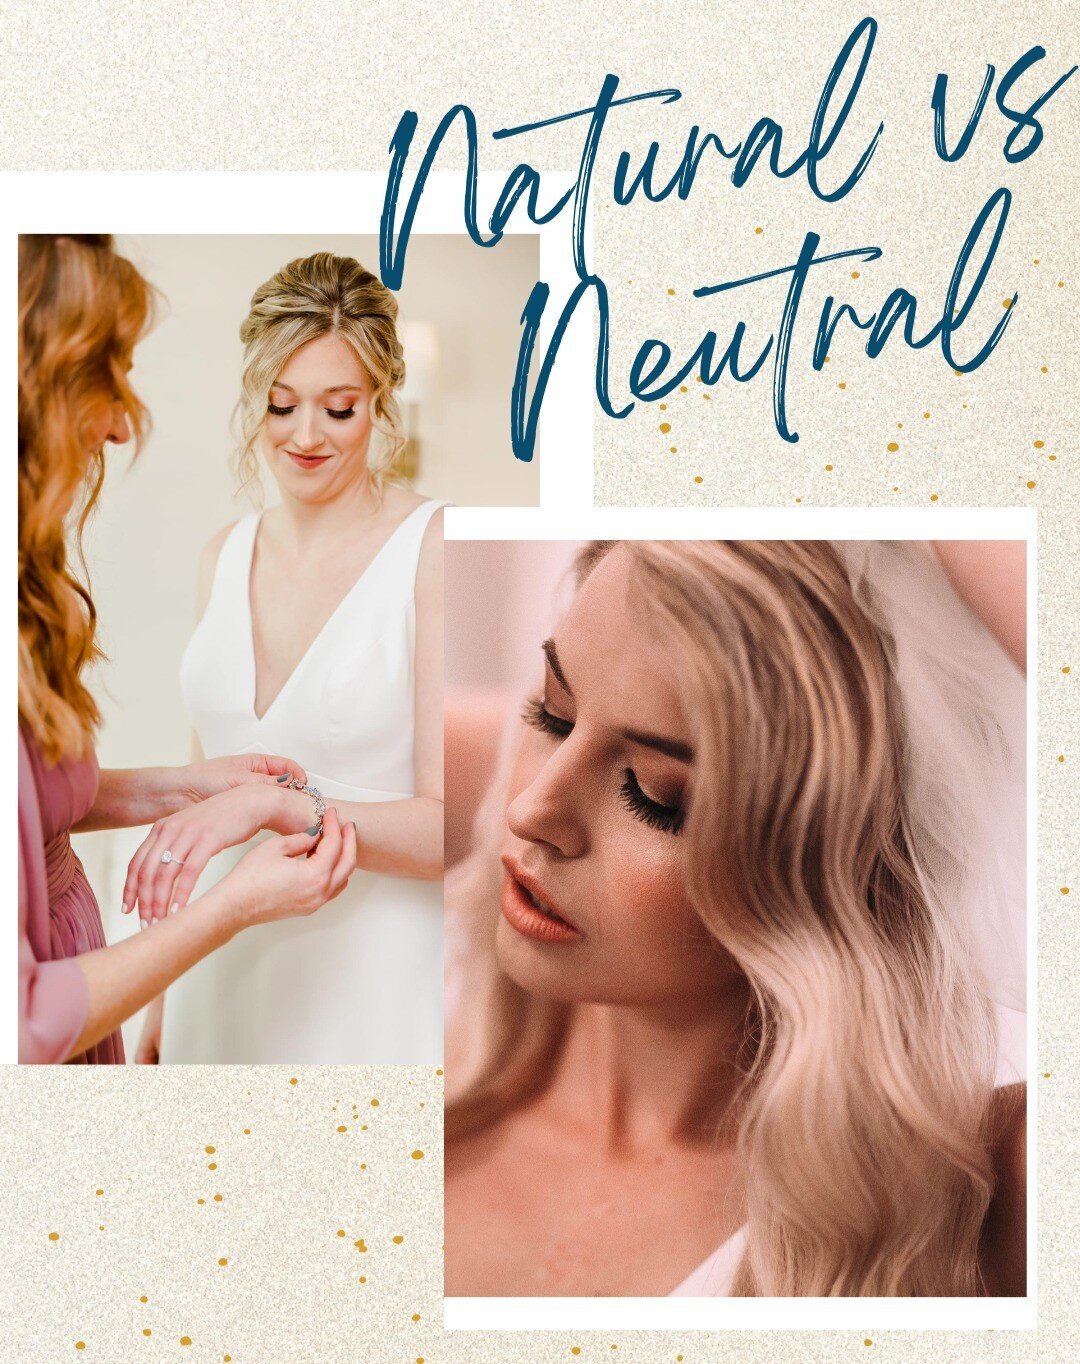 ✨Tips For Achieving Your Perfect Wedding Makeup Look....

💄When searching for wedding day makeup looks, it's crucial to remember that wedding makeup is not a one-size-fits-all approach. Your makeup should be customized to reflect you individuality a